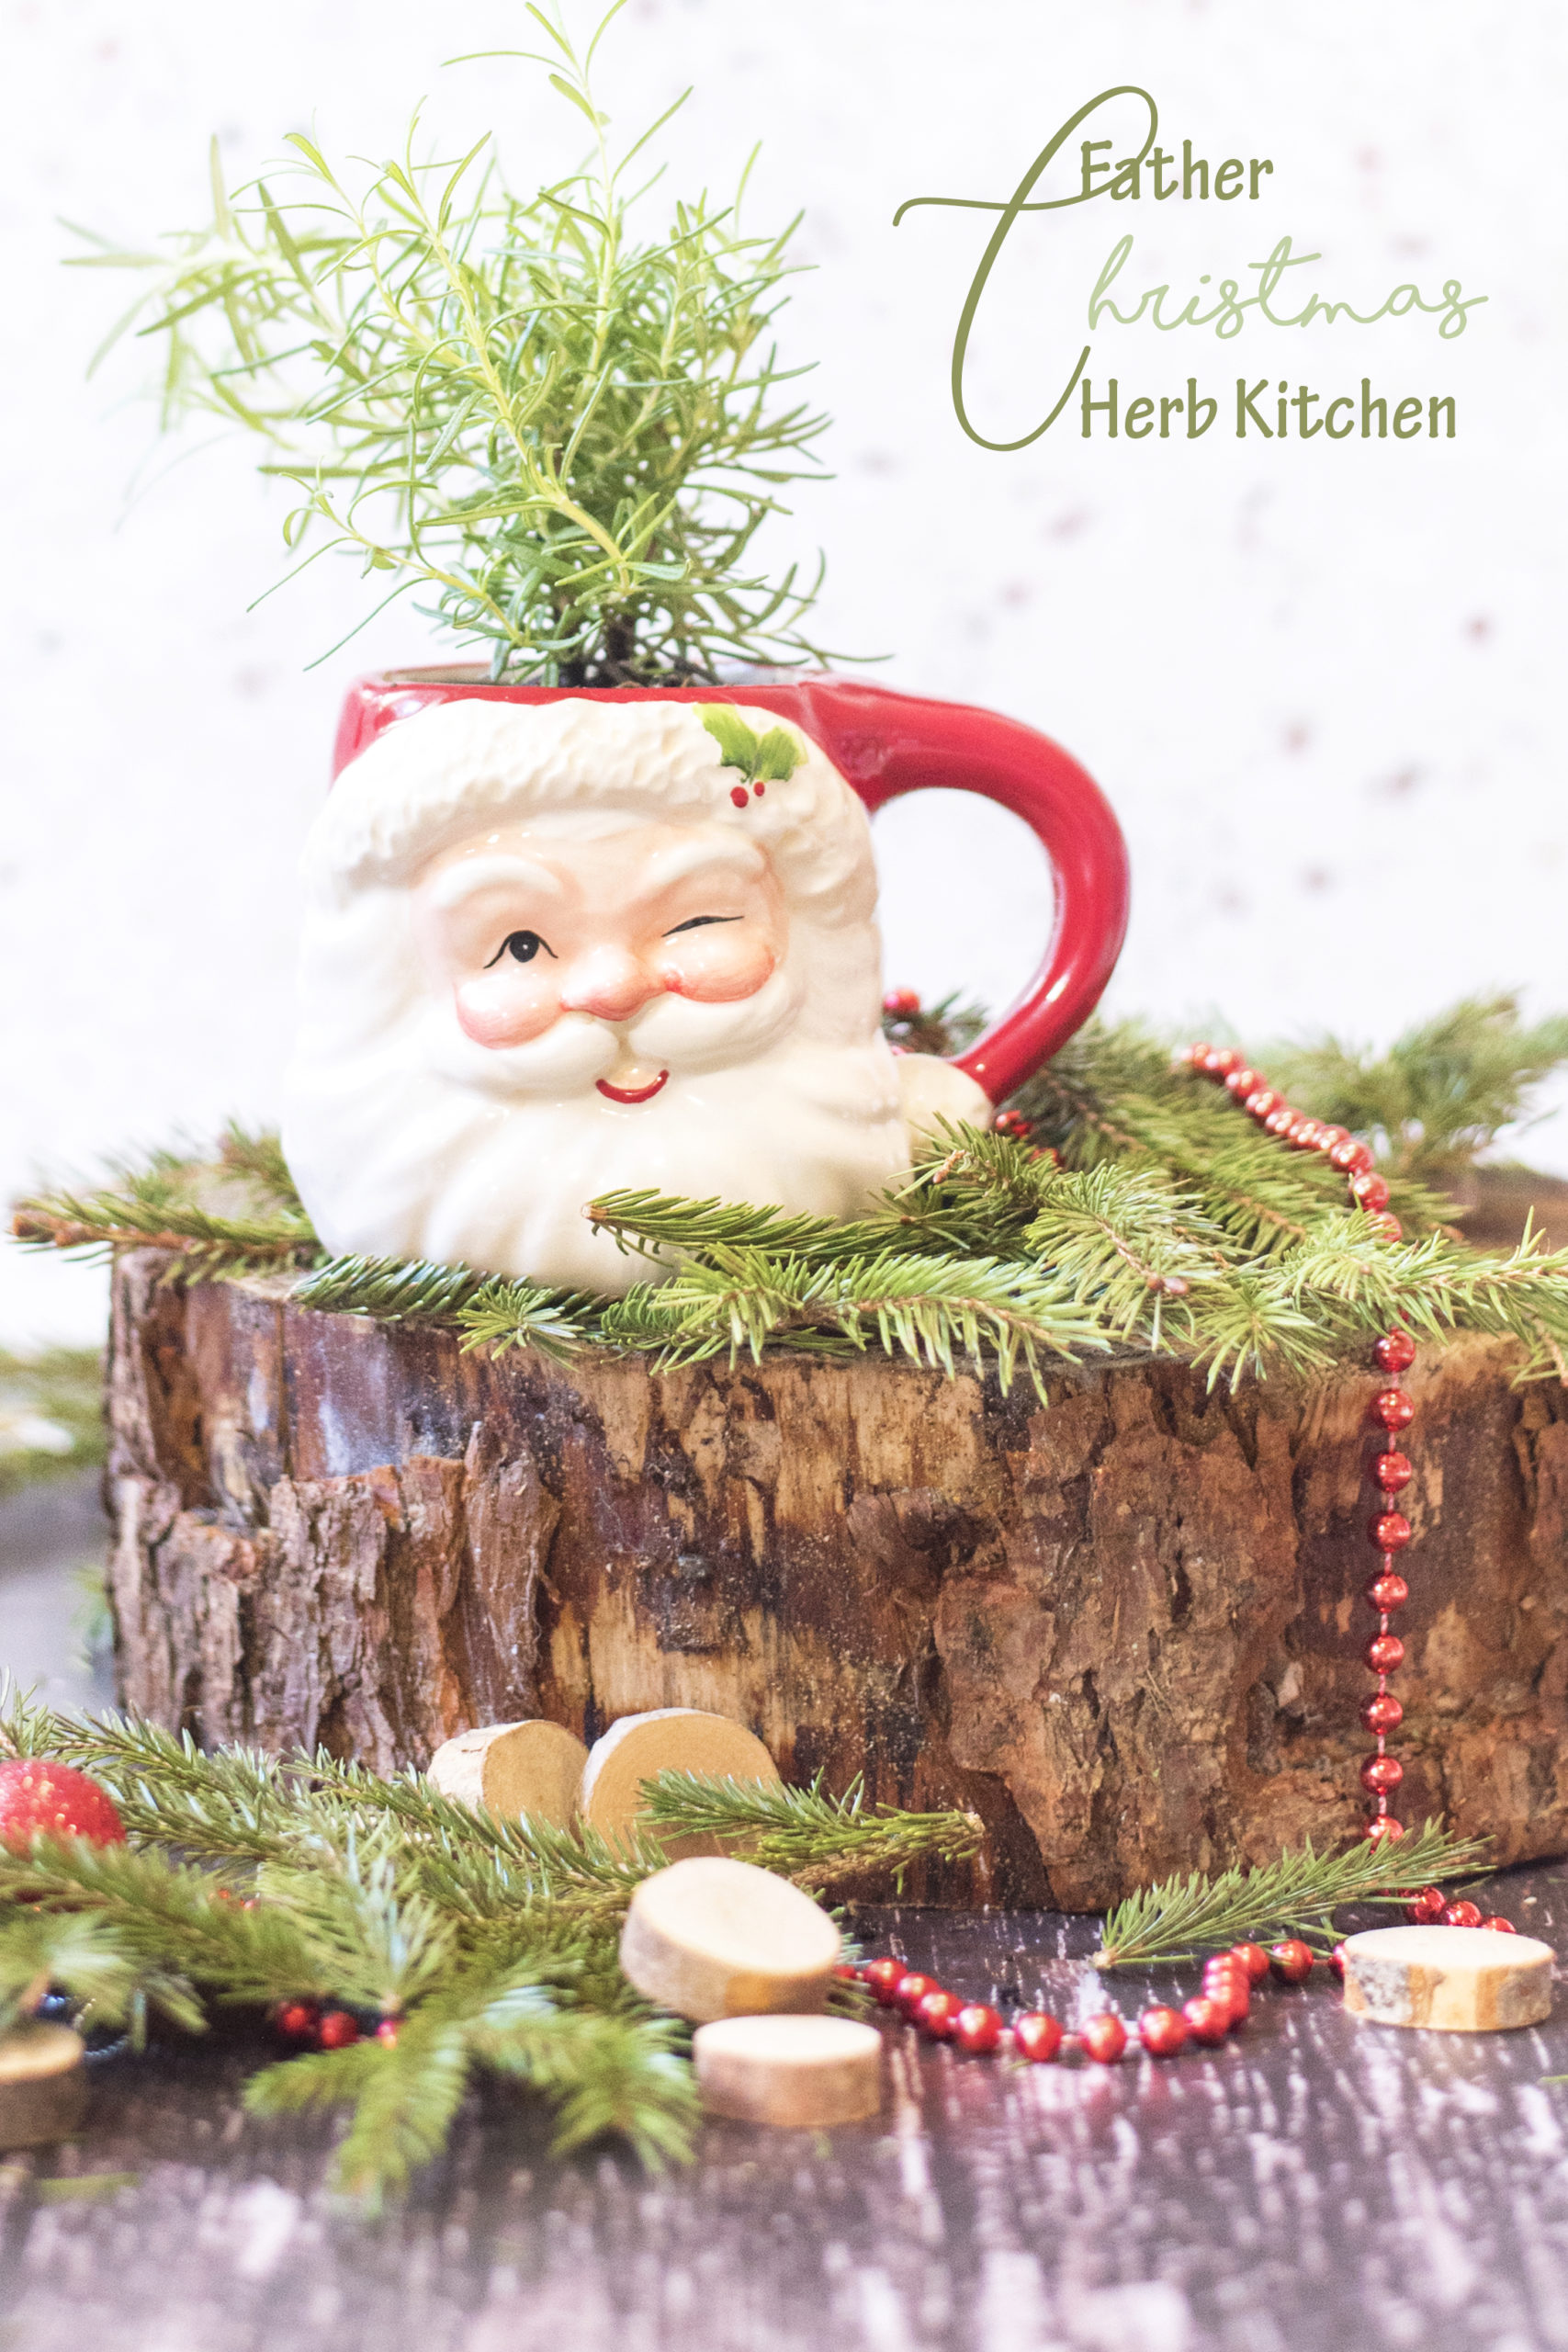 FATHER CHRISTMAS HERB KITCHEN [DIY]